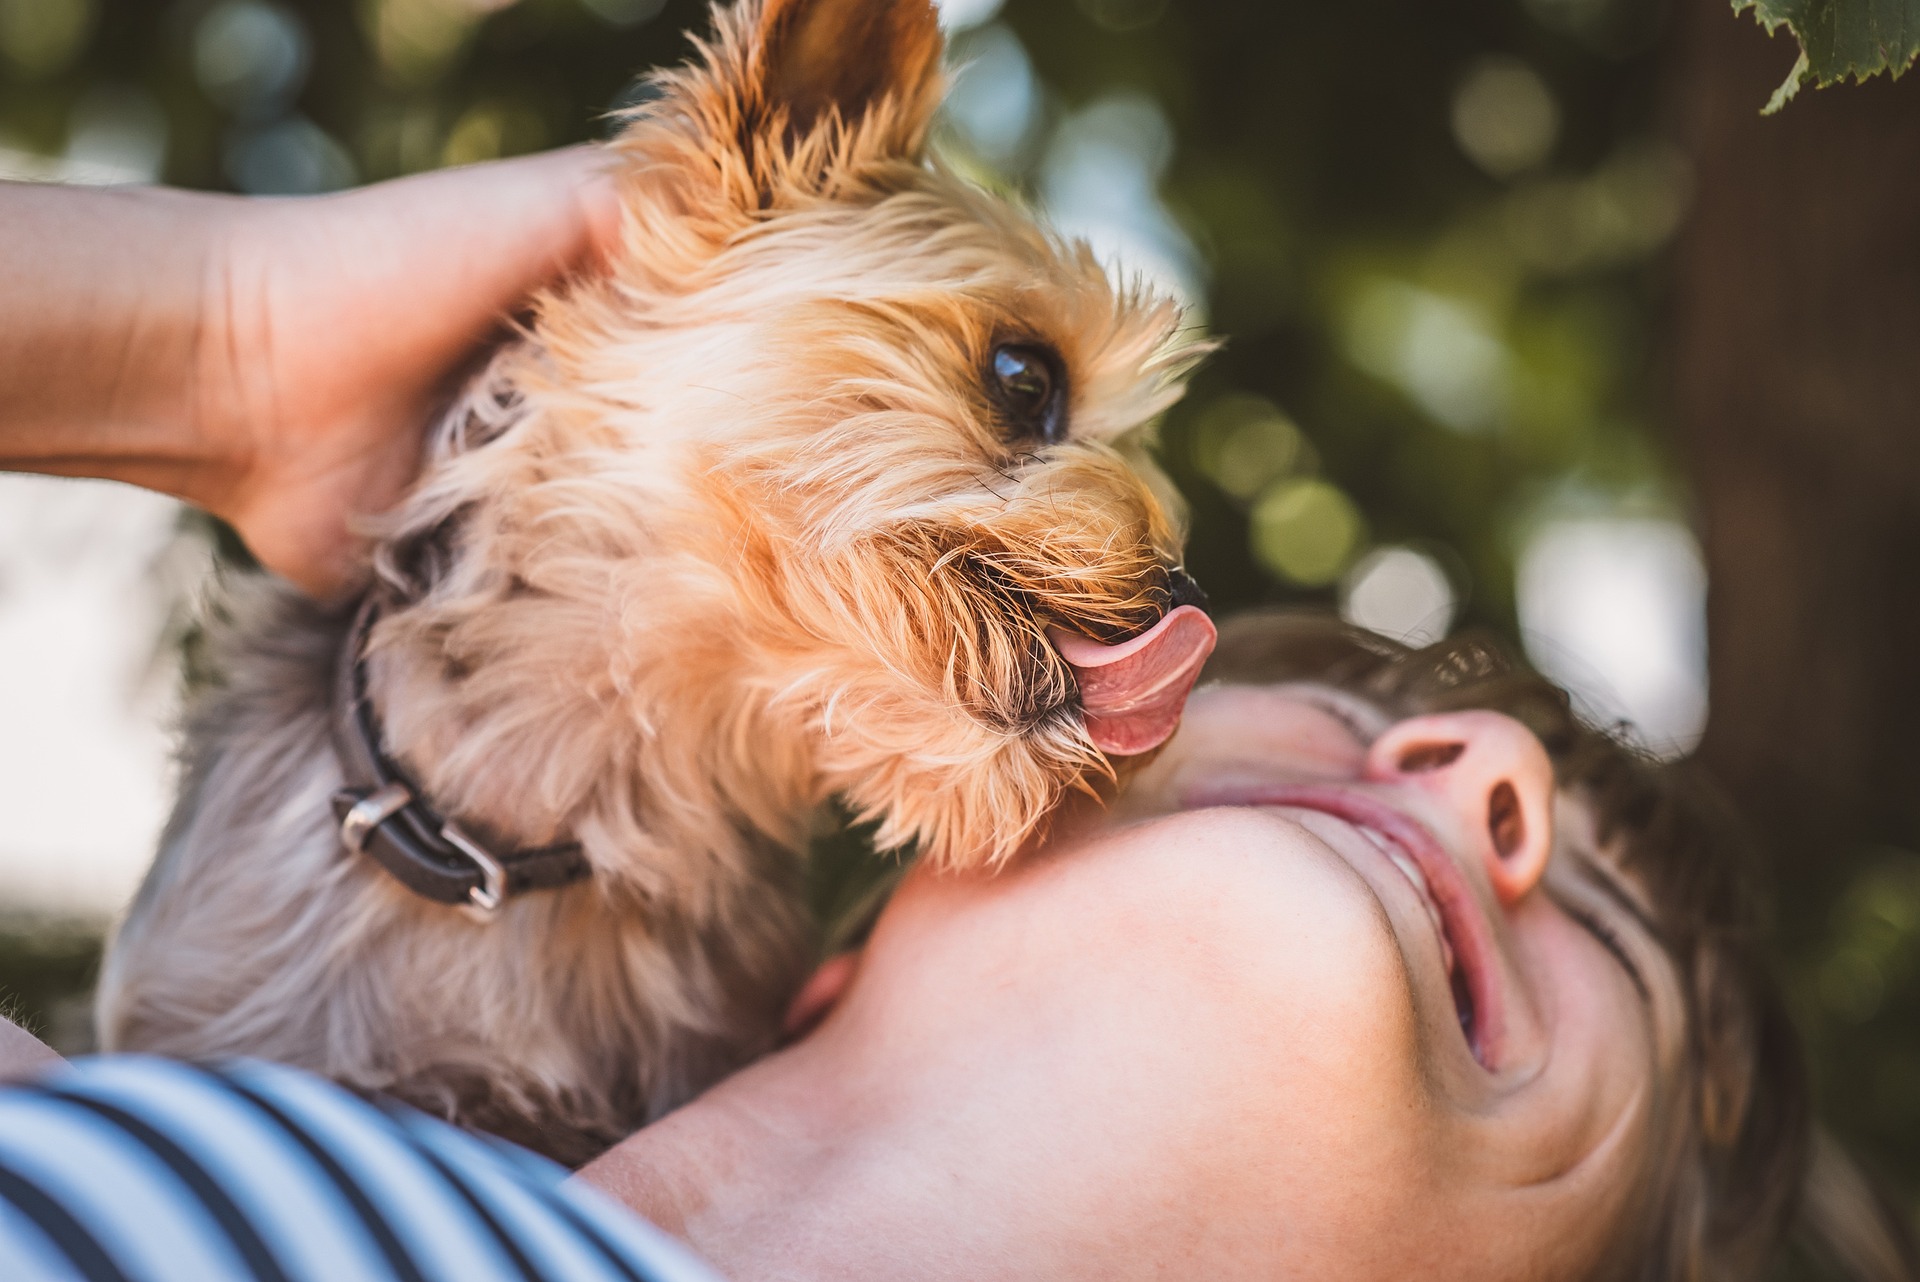 Why Does My Dog Lick My Face?